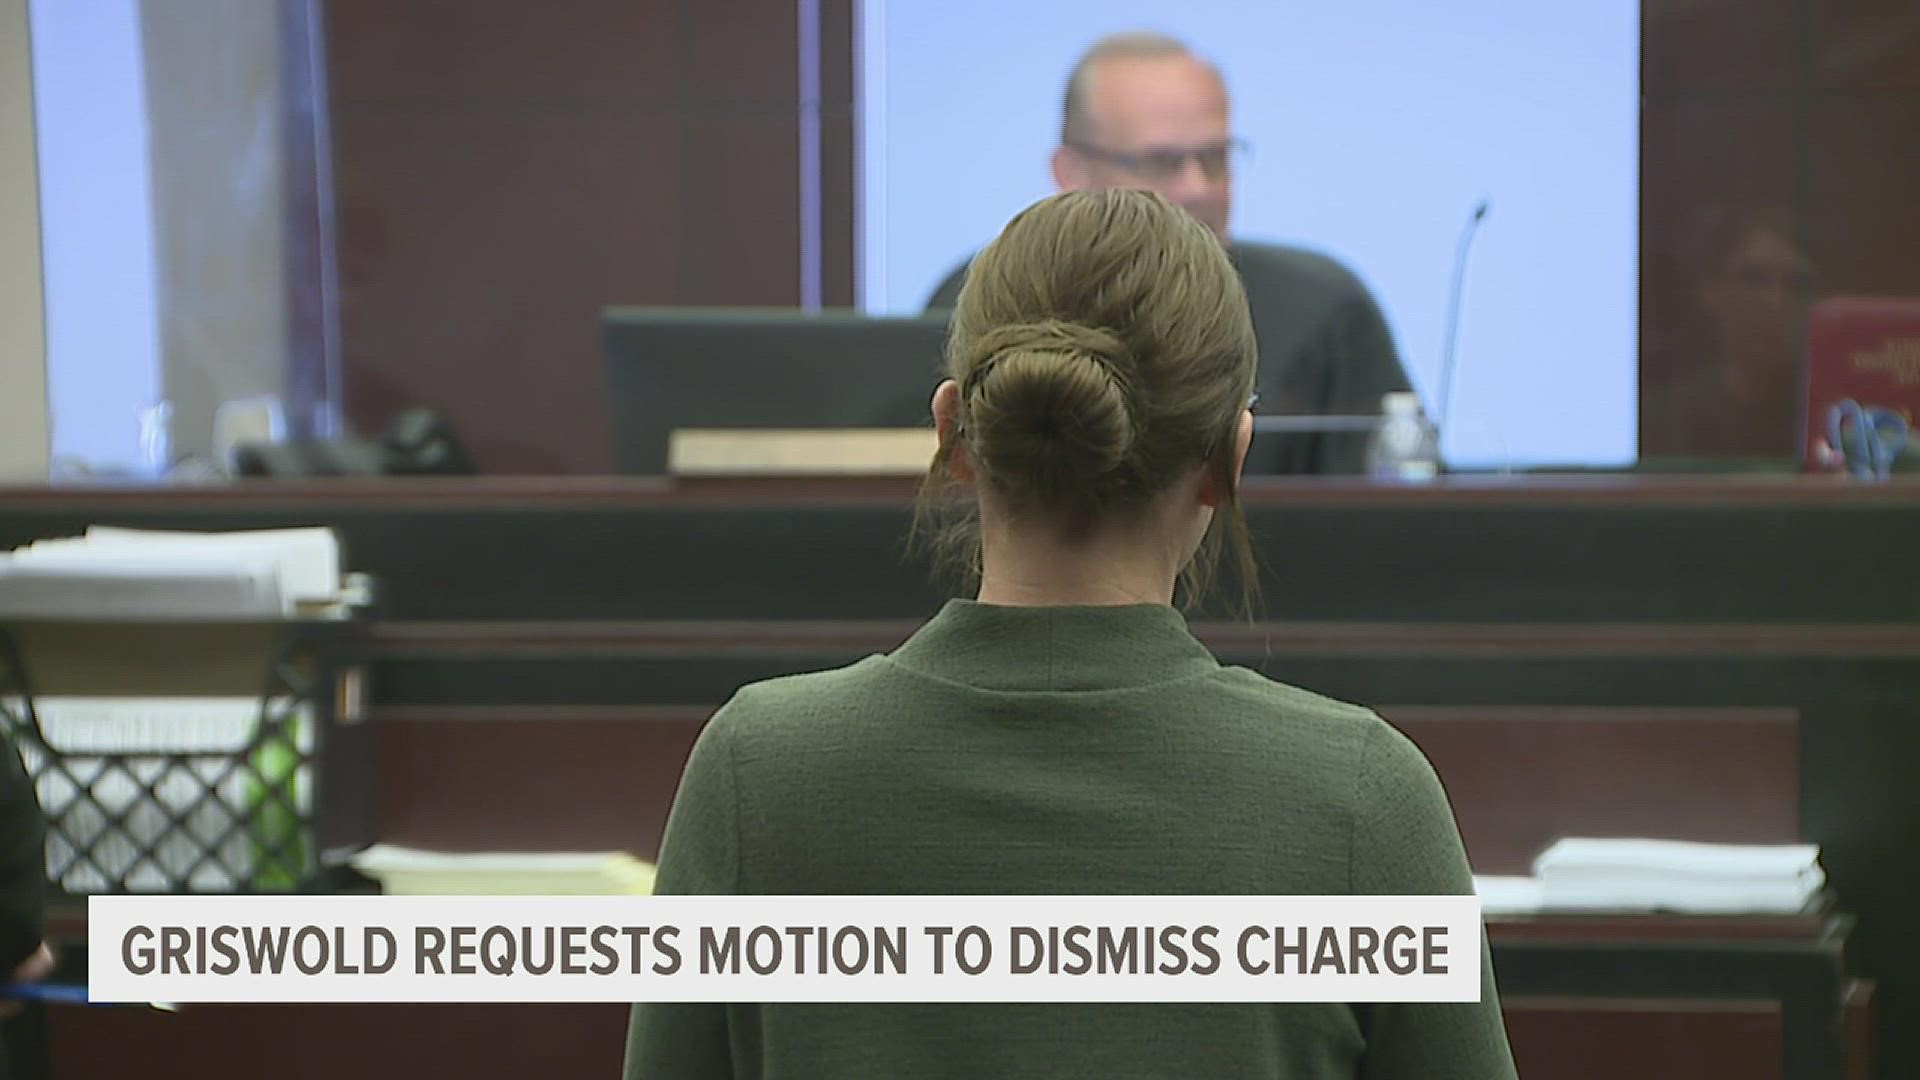 The hearing on the motion to dismiss will be held on Nov. 29.